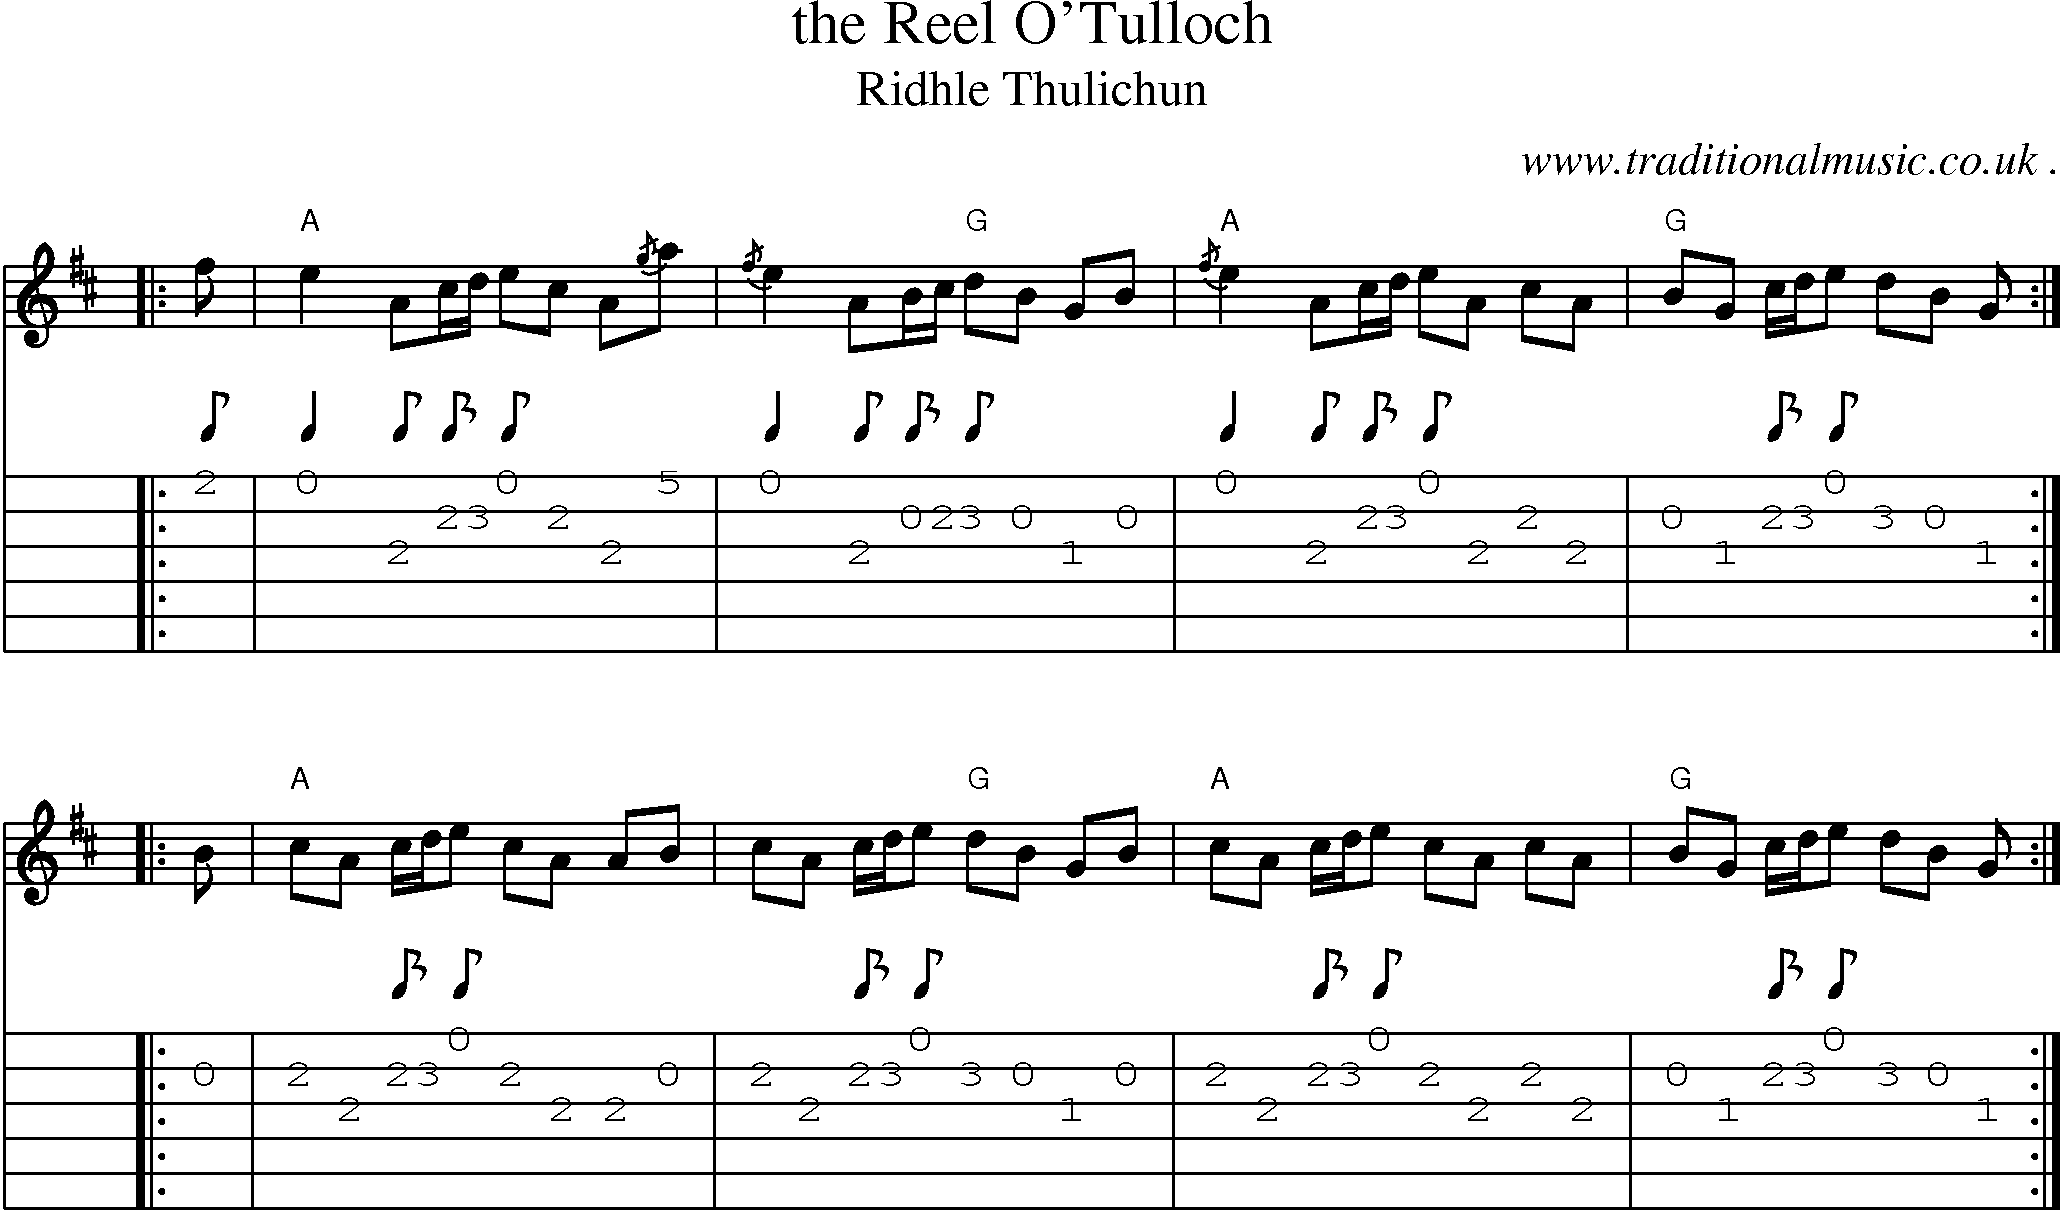 Sheet-music  score, Chords and Guitar Tabs for The Reel Otulloch